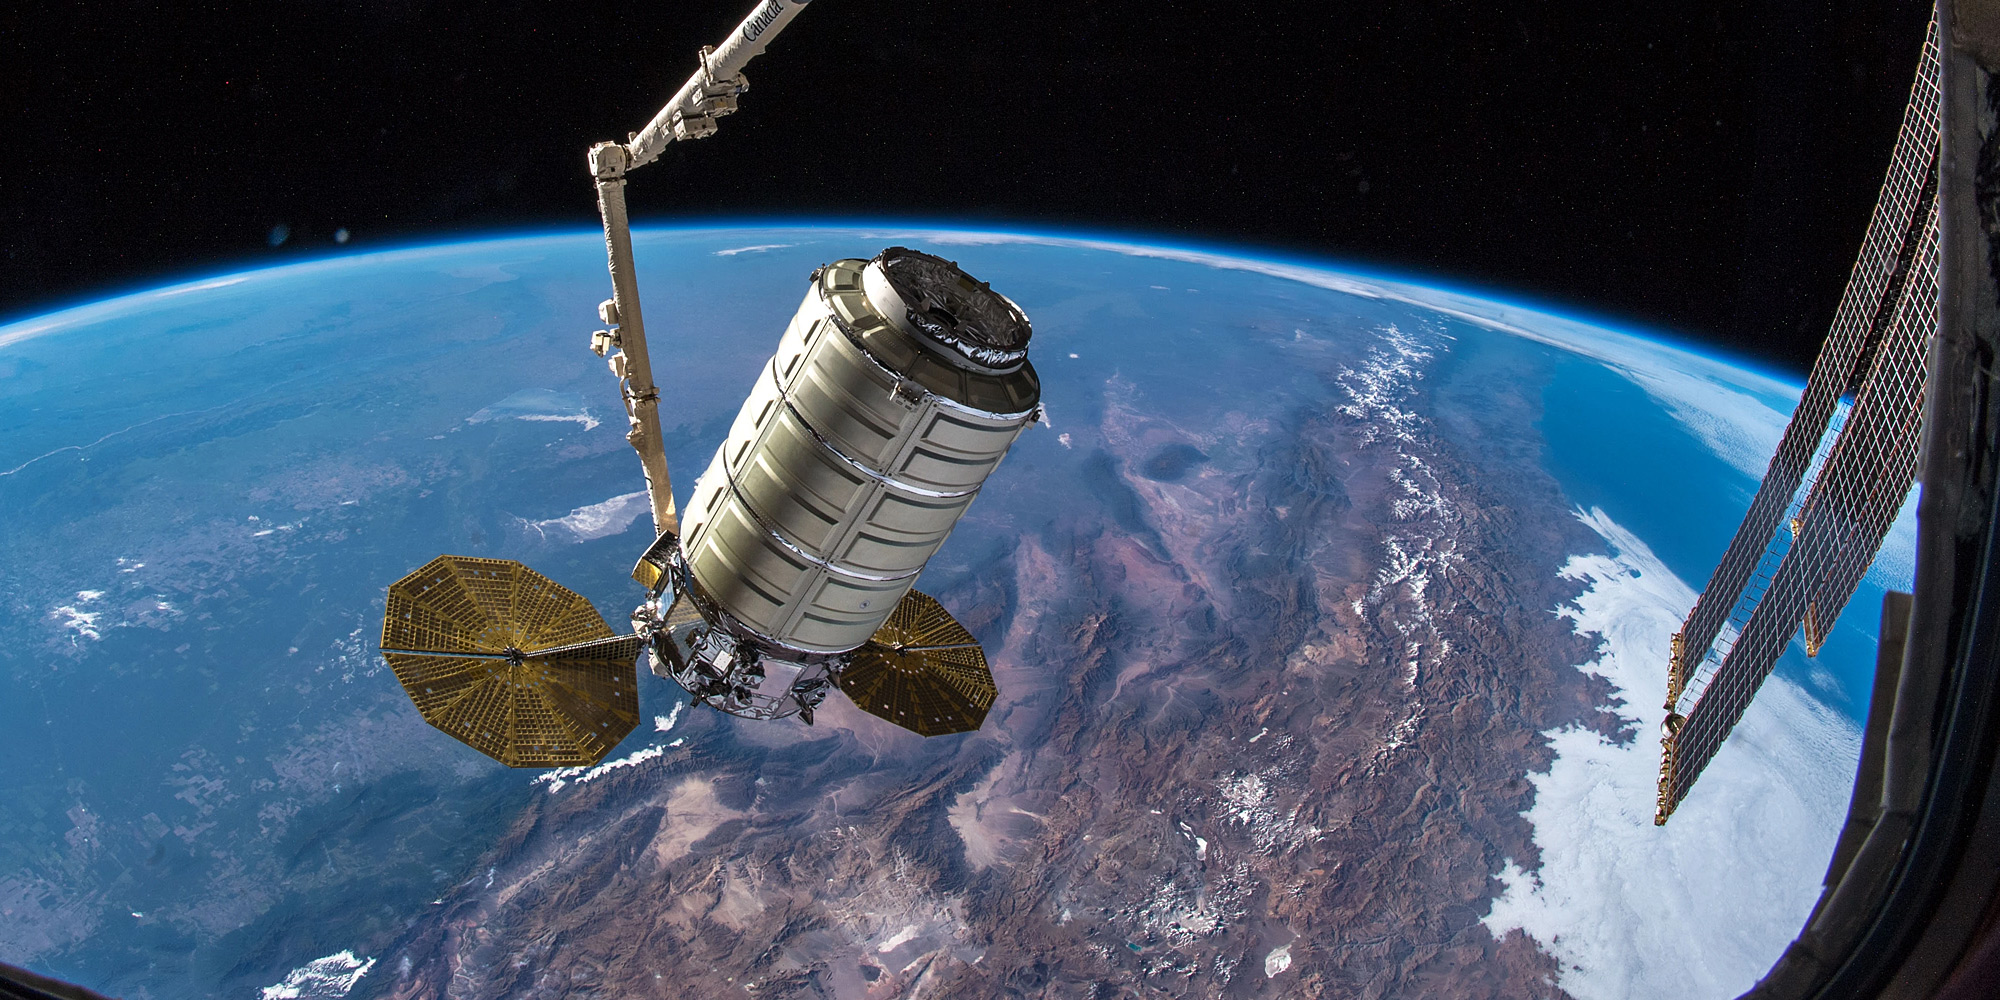 Cygnus spacecraft above earth docking with the International Space Station